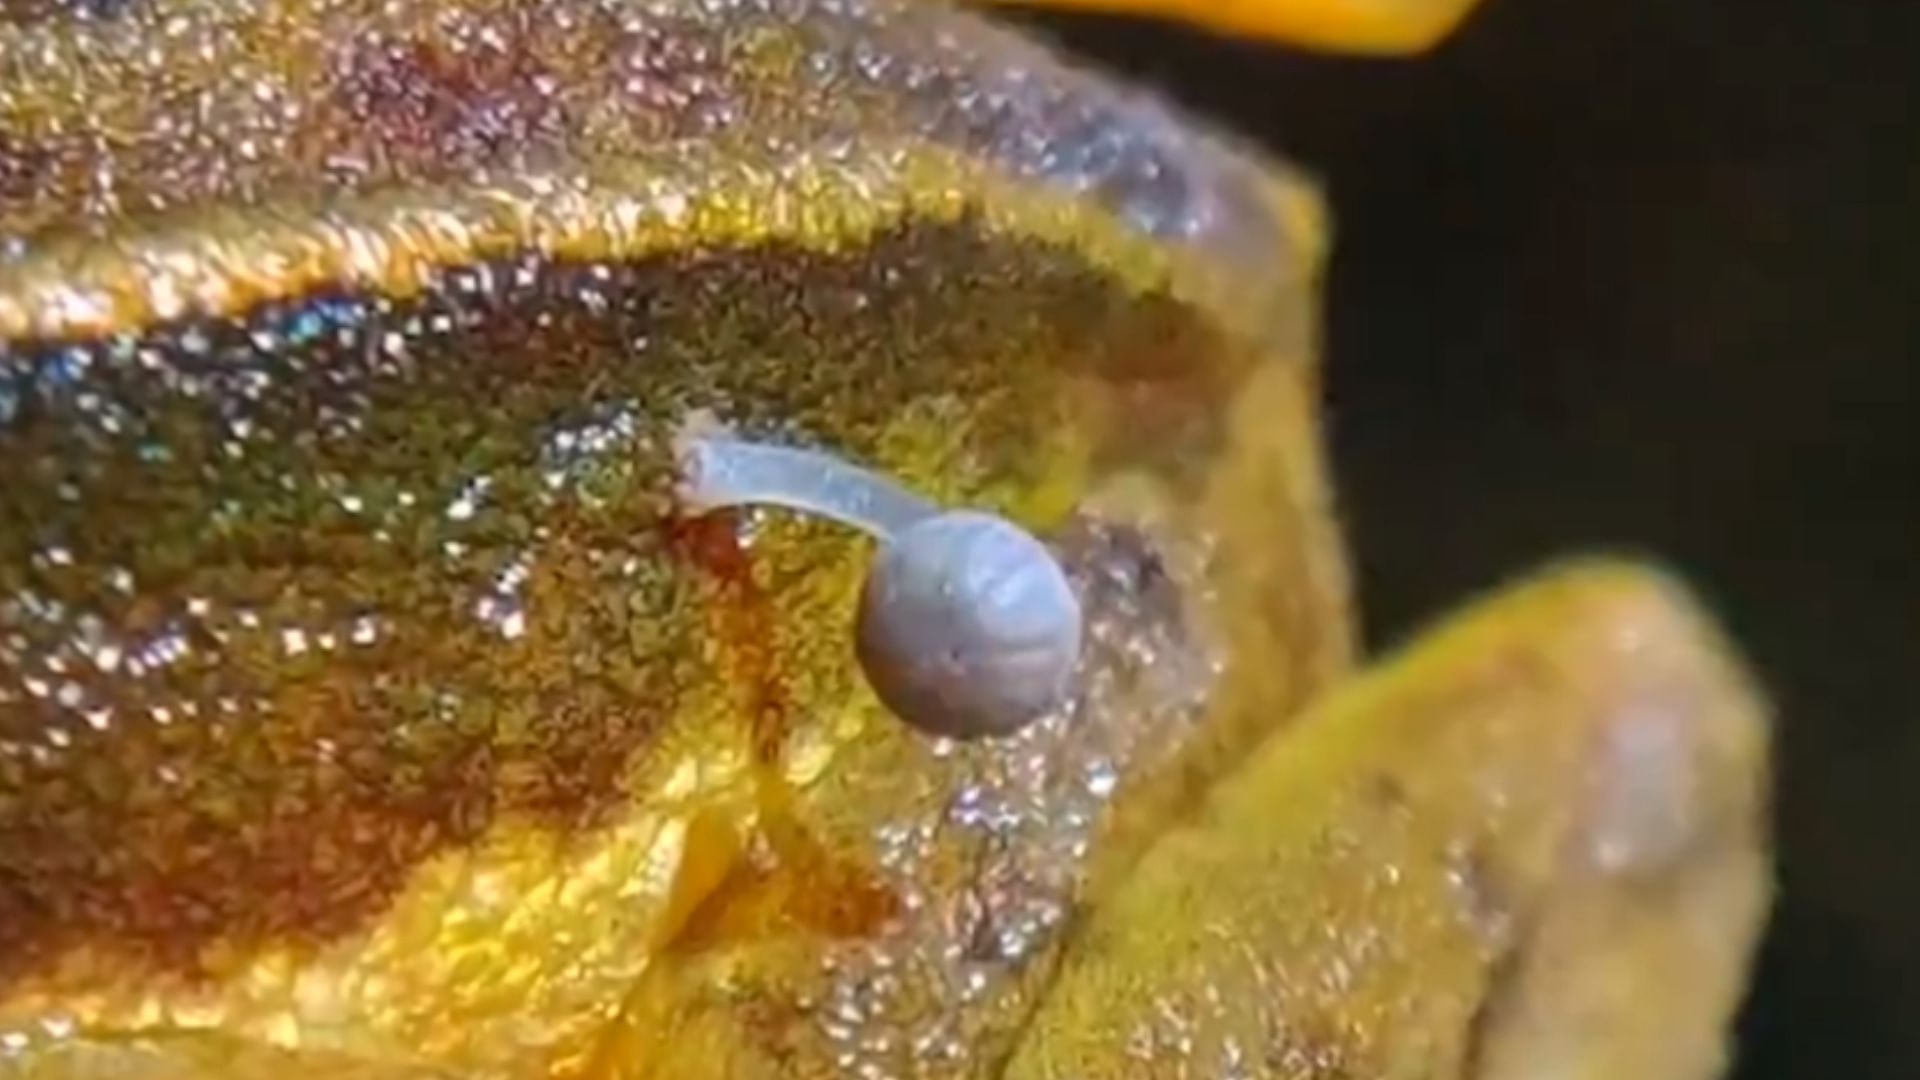 Viral News: Mushroom growing on a frog in India baffles scientists